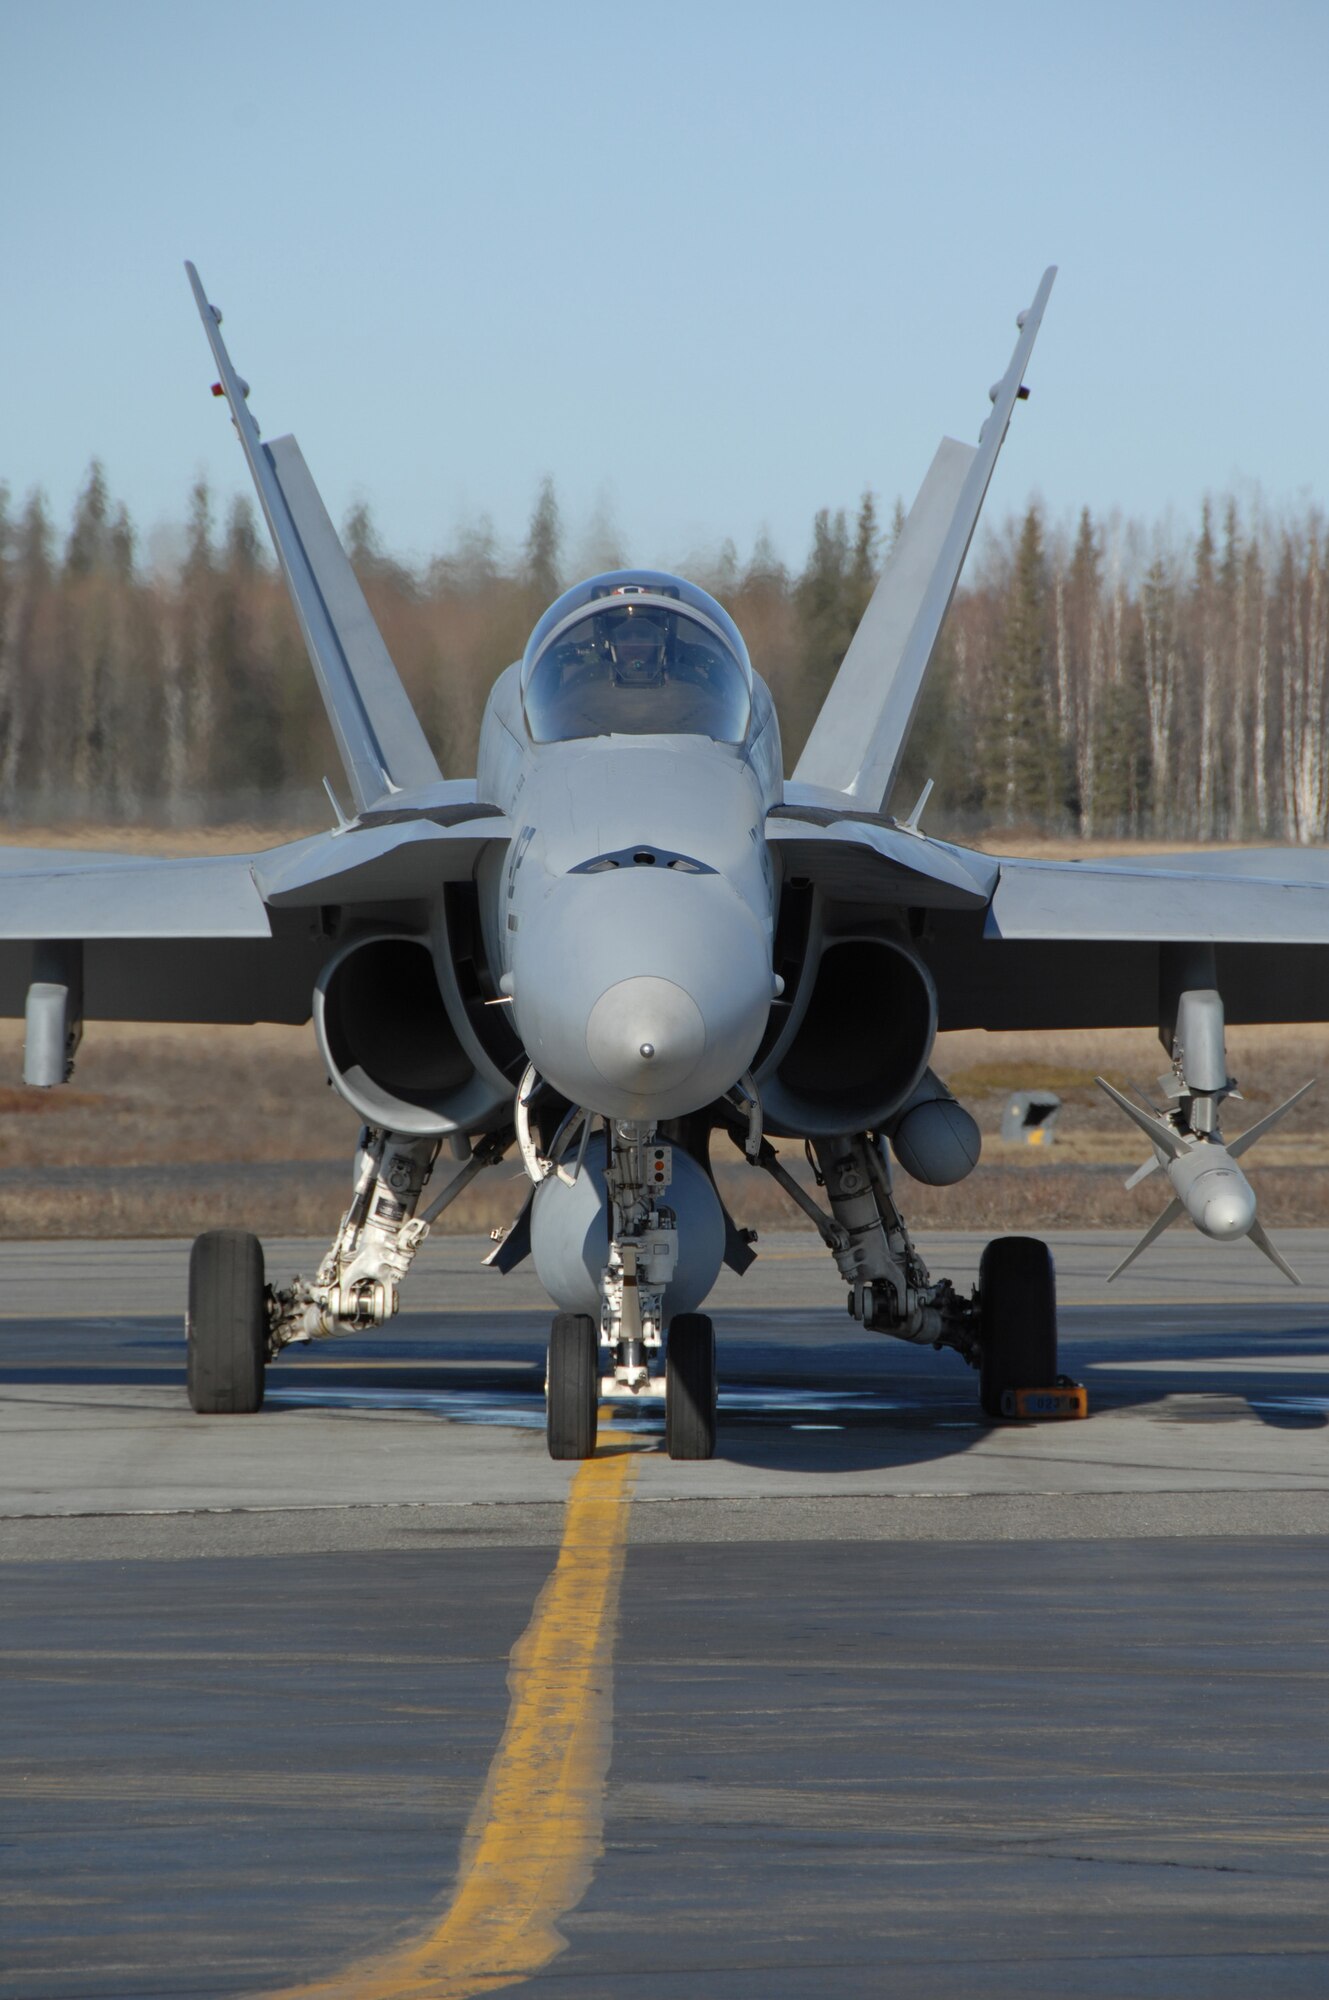 EIELSON AIR FORCE BASE, Alaska -- A Navy F/A-18 from Strike Fighter Squadron Eight Seven (VFA-87) sits on the flightline here during Red Flag-Alaska 07-1 here on April 12. VFA-87 is home based at Naval Air Station Oceana, Virginia. Red Flag-Alaska is a Pacific Air Forces-directed field training exercise for U.S. forces flown under simulated air combat conditions. It is conducted on the Pacific Alaskan Range Complex with air operations flown out of Eielson and Elmendorf Air Force Bases. (U.S. Air Force Photo by Staff Sgt Joshua Strang)